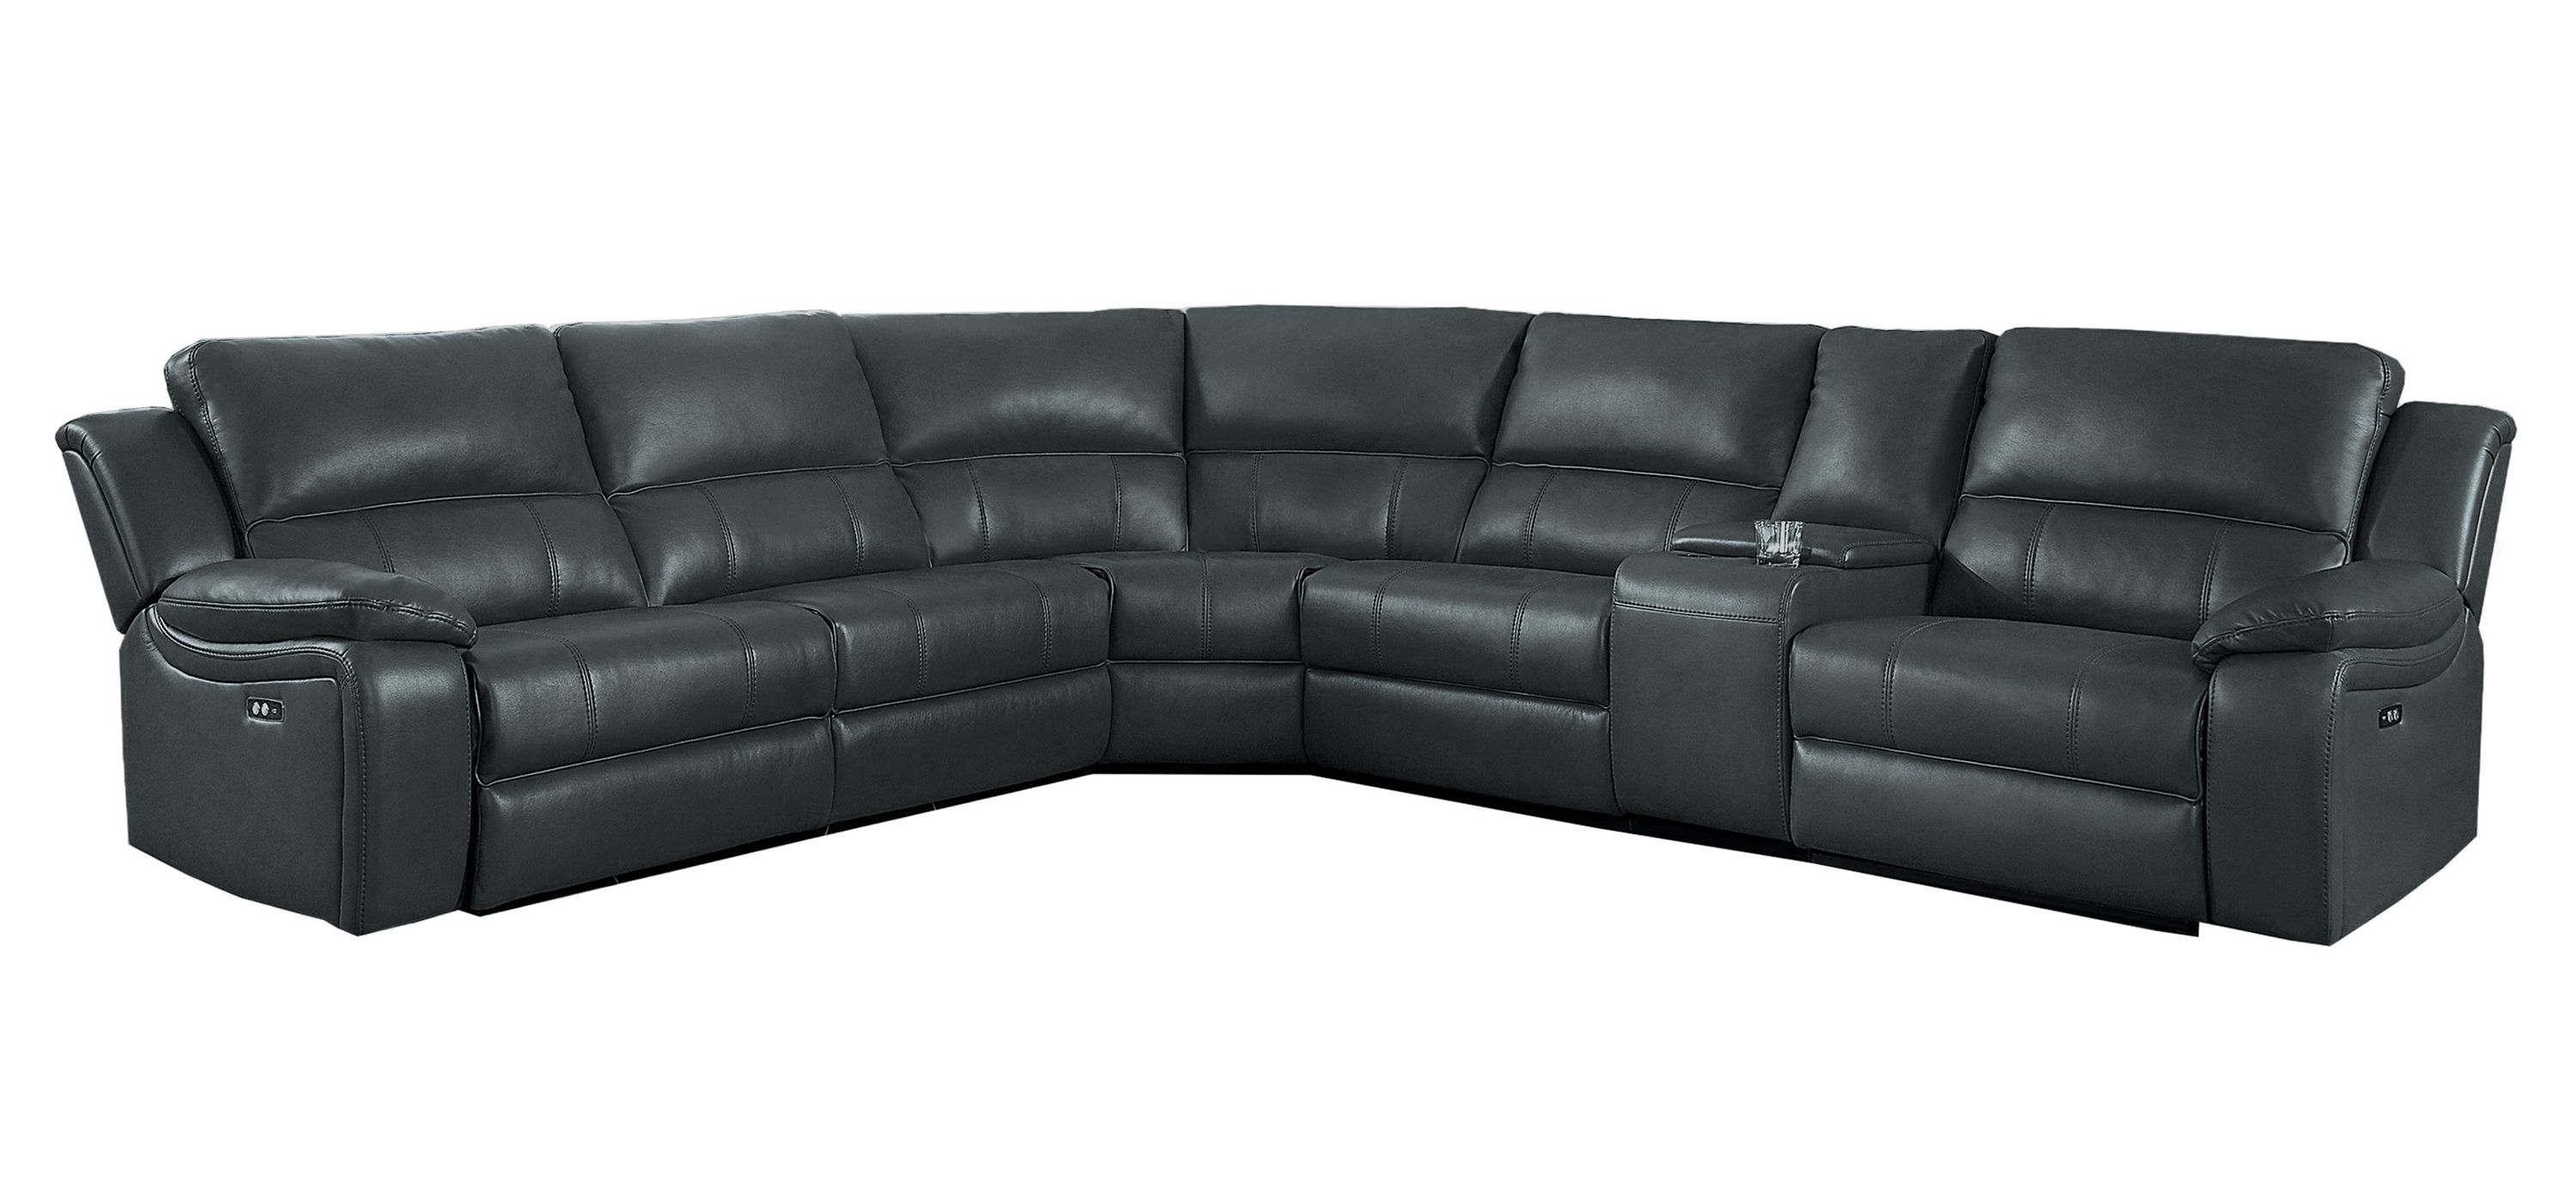 Barstow 6-pc Power Reclining Sectional